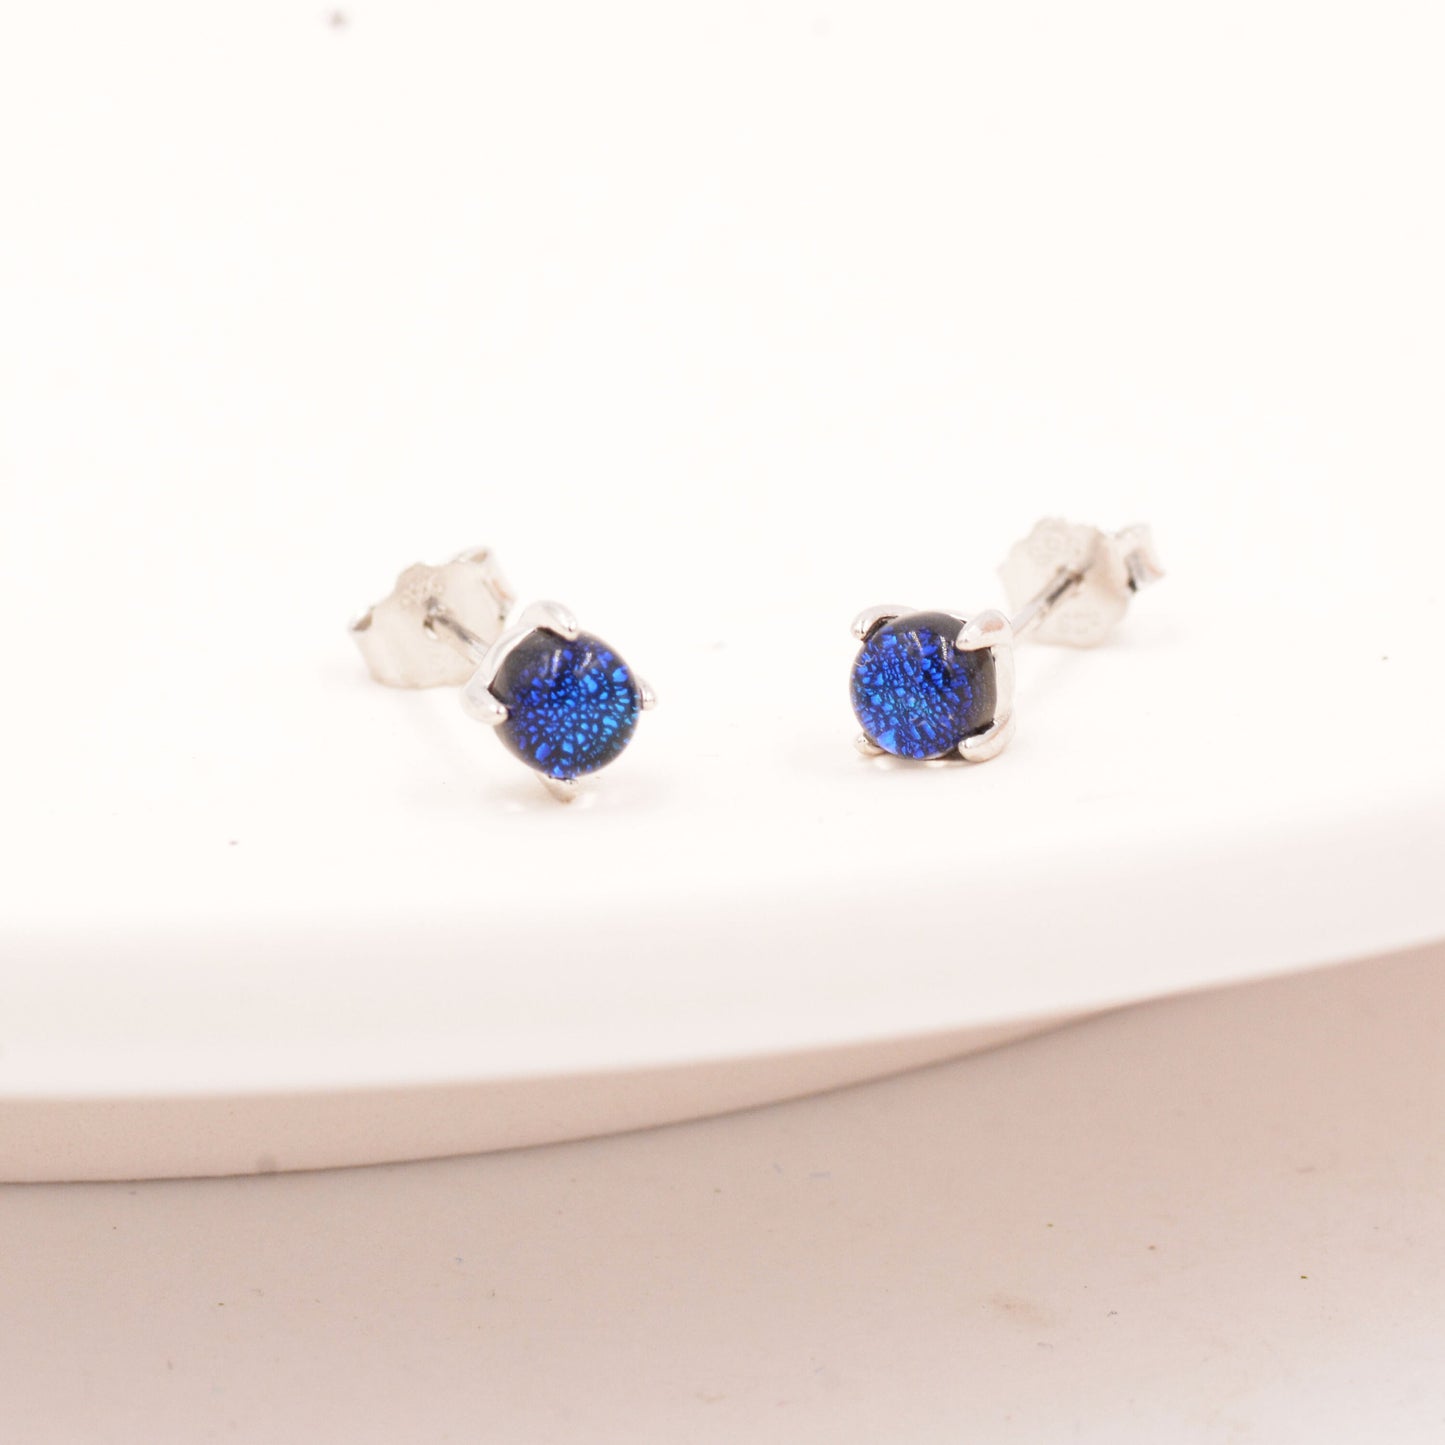 Sterling Silver Gold Dichroic Glass Stud Earrings, 4mm, Glass Crystal Dark Blue - 4 Prongs, Minimalist Style